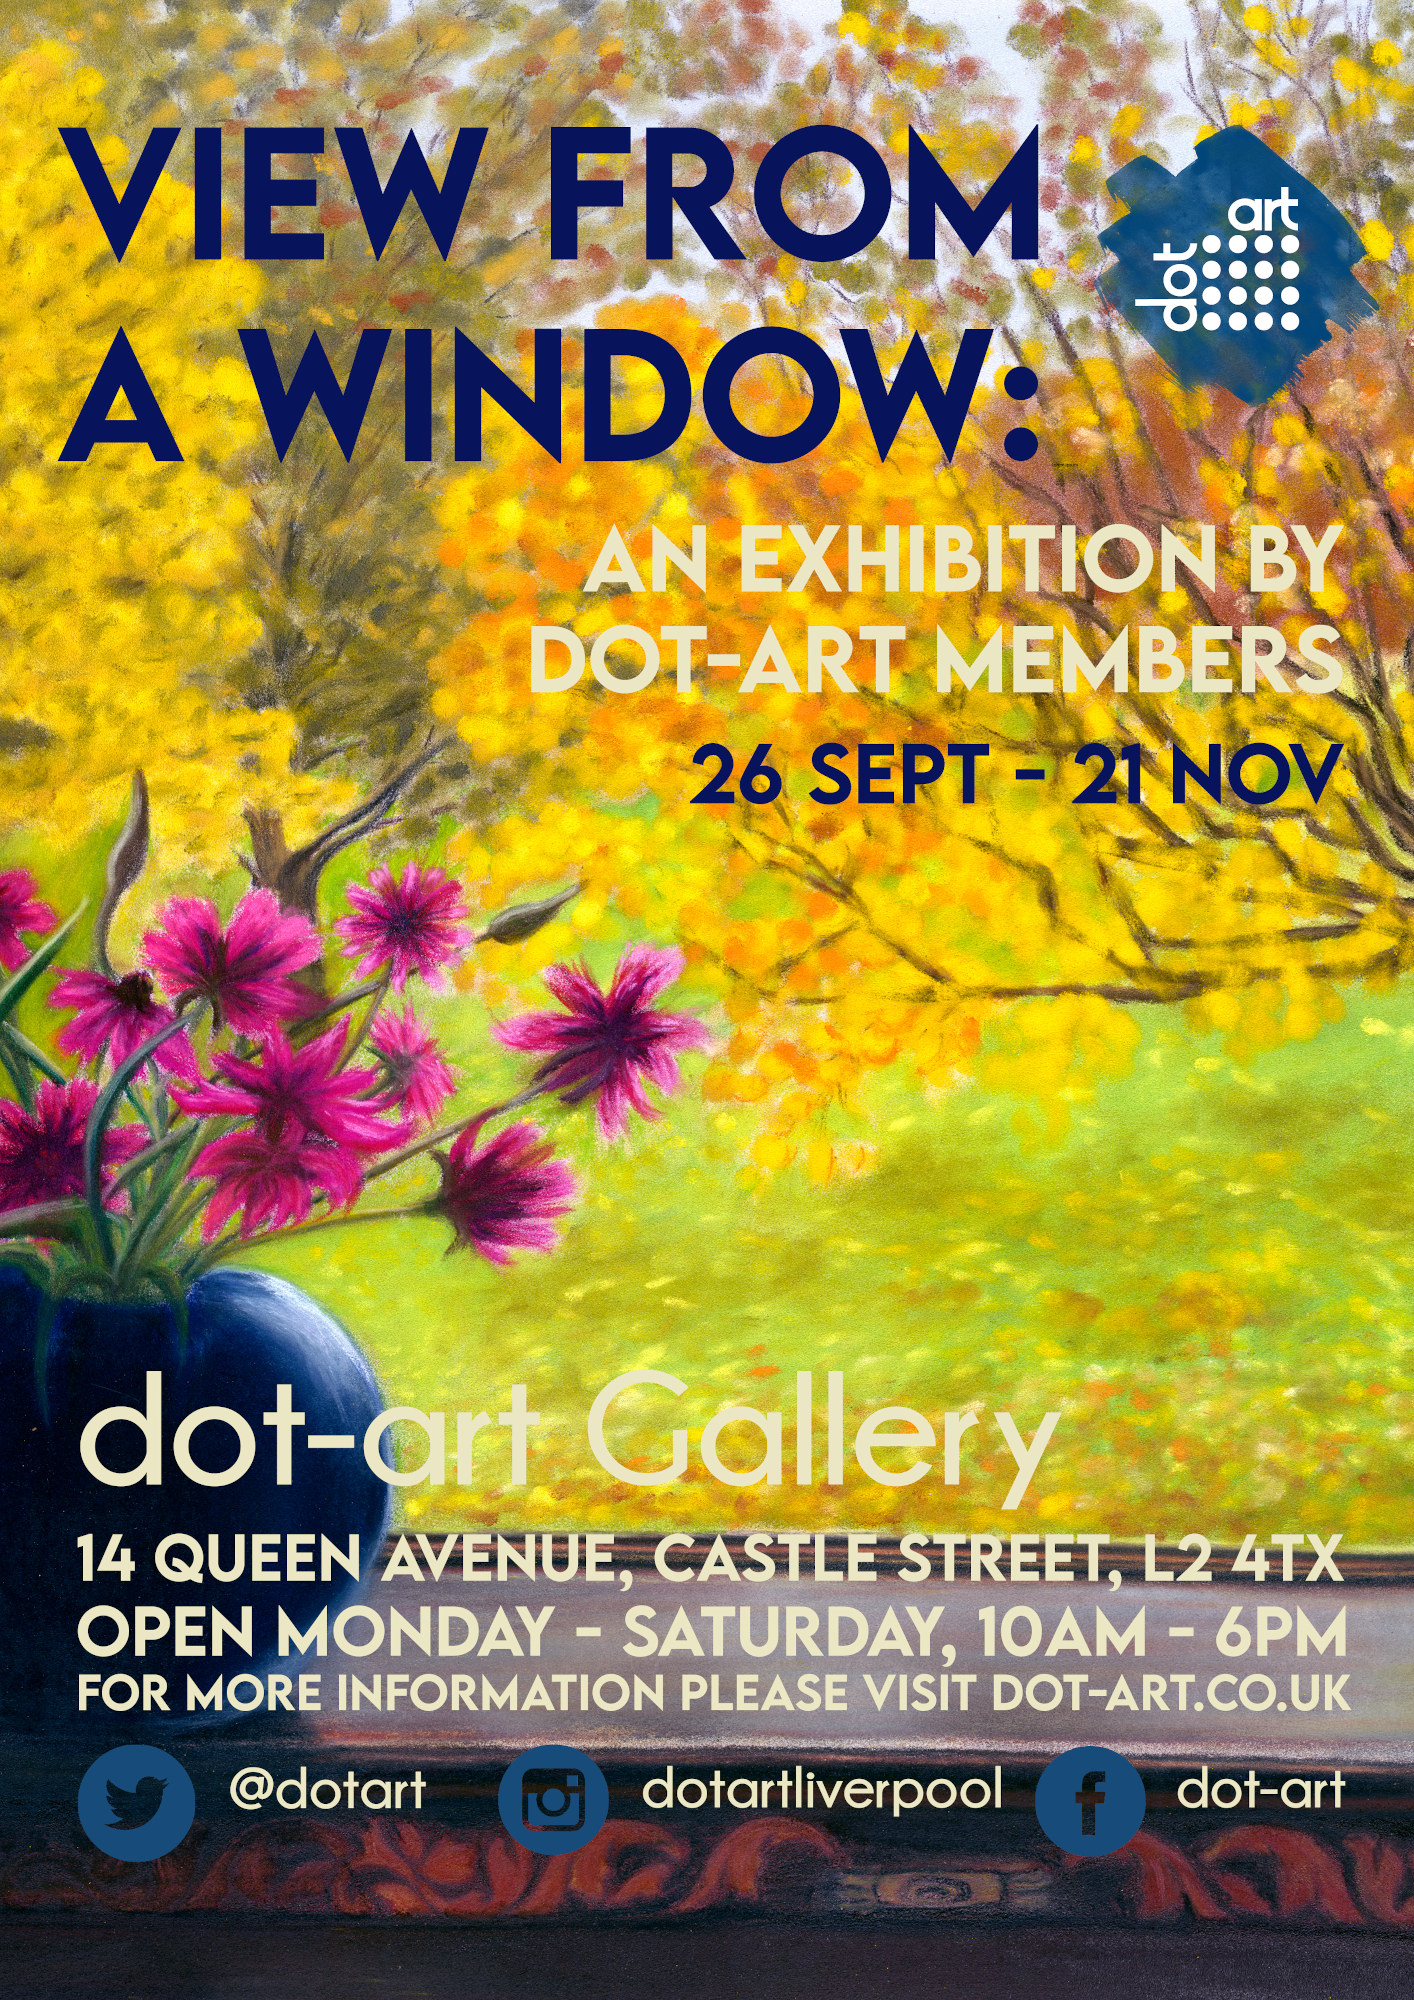 dot art poster promoting exhibit featuring flowers on a windowsill, dot art logo and title view from a window